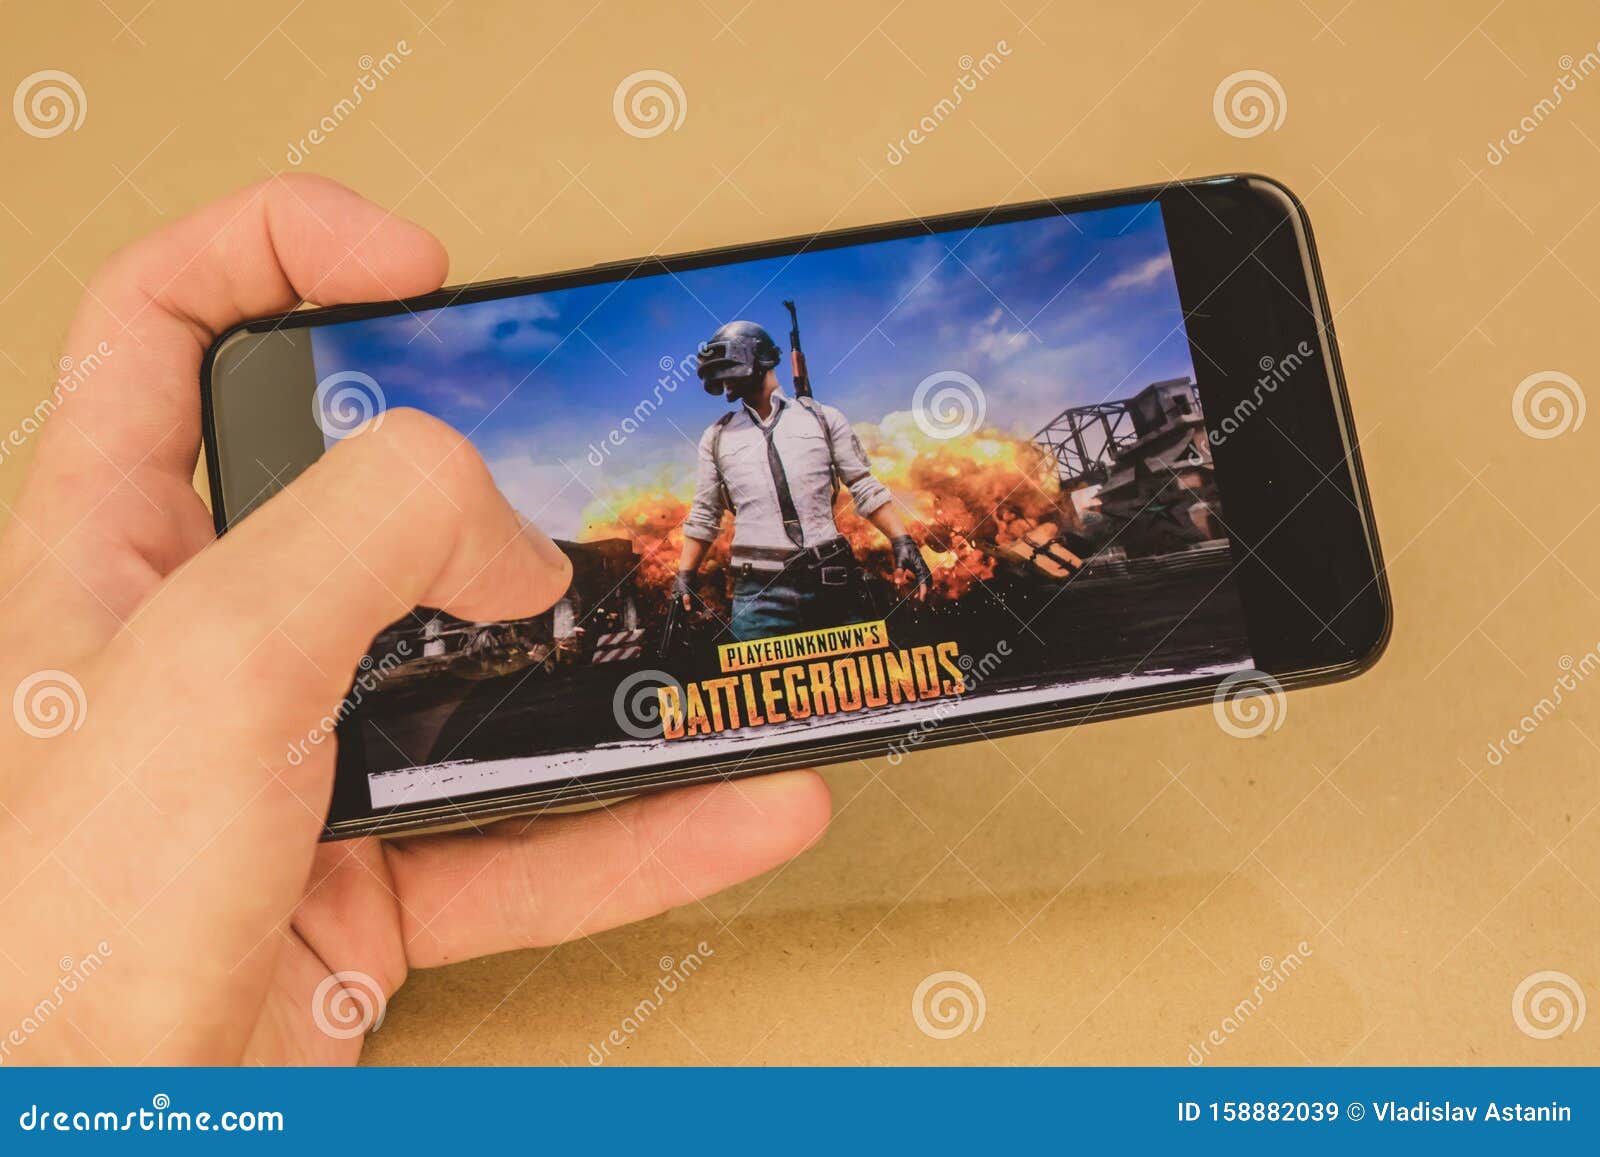 Los Angeles, USA - September 10, 2019: Screensaver of Pubg Mobile Game  Editorial Stock Image - Image of background, online: 158882039